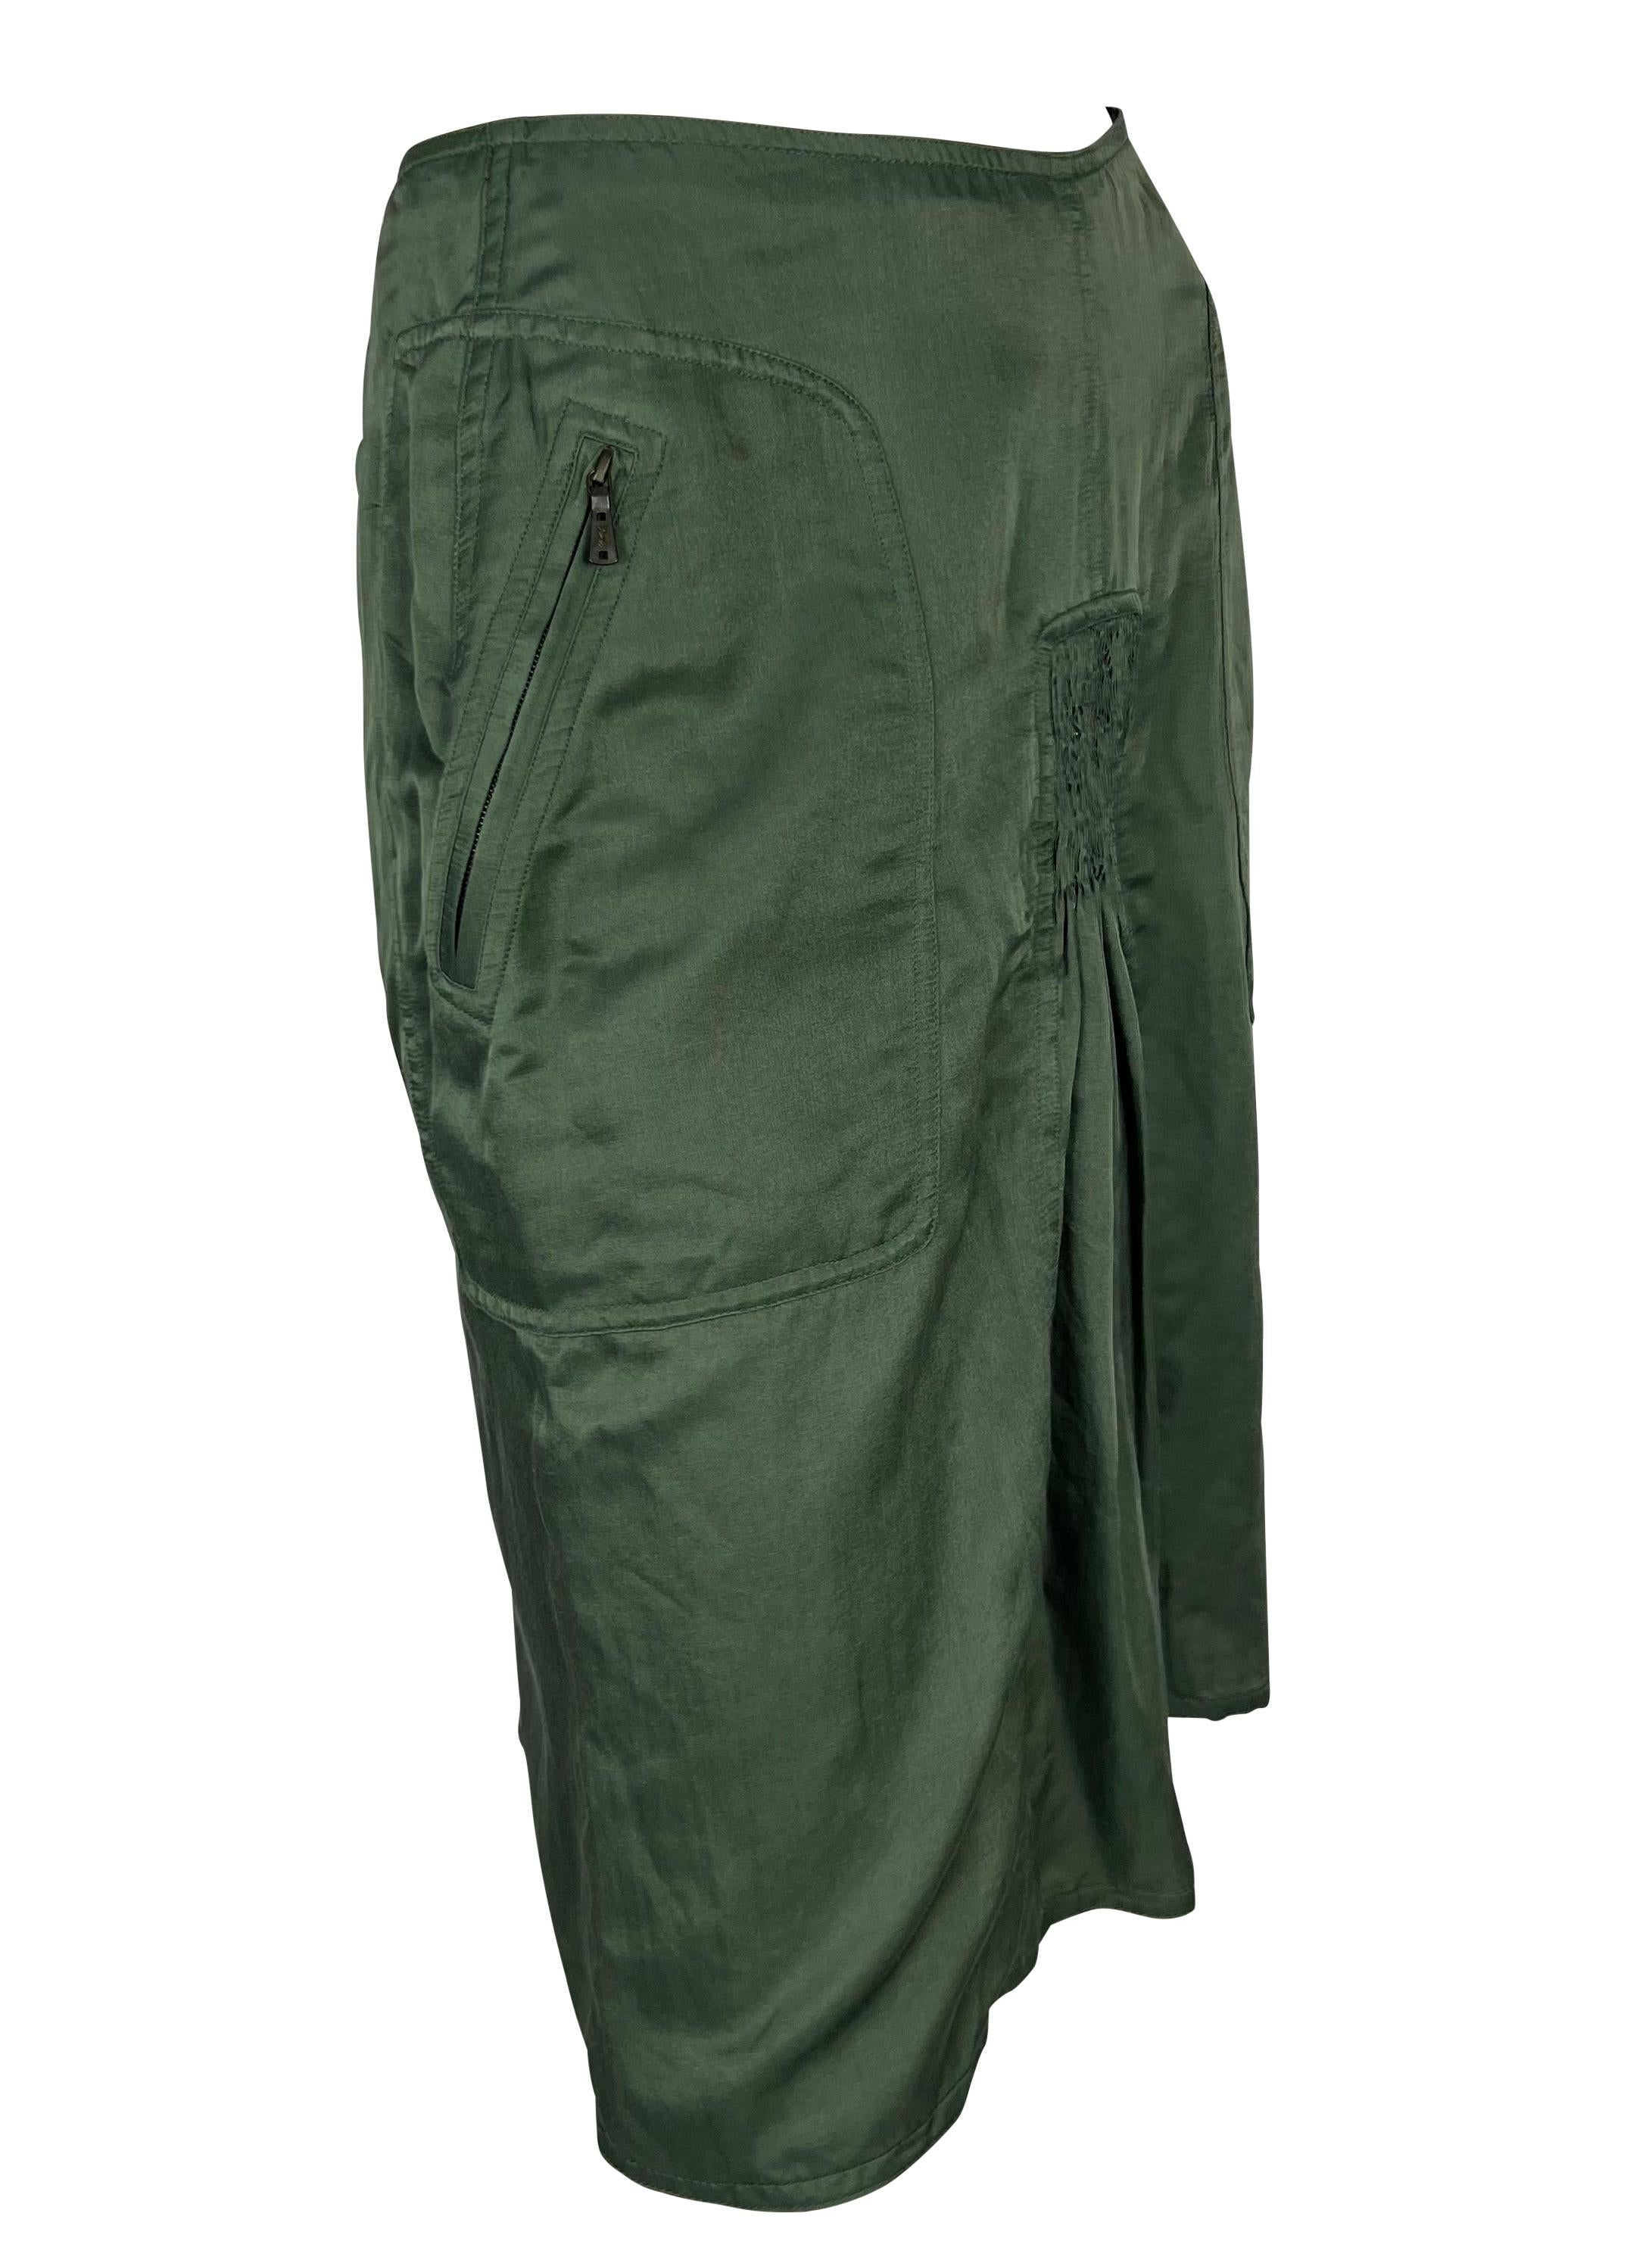 S/S 2003 Yves Saint Laurent by Tom Ford Olive Green Ruched Stretch Skirt For Sale 1